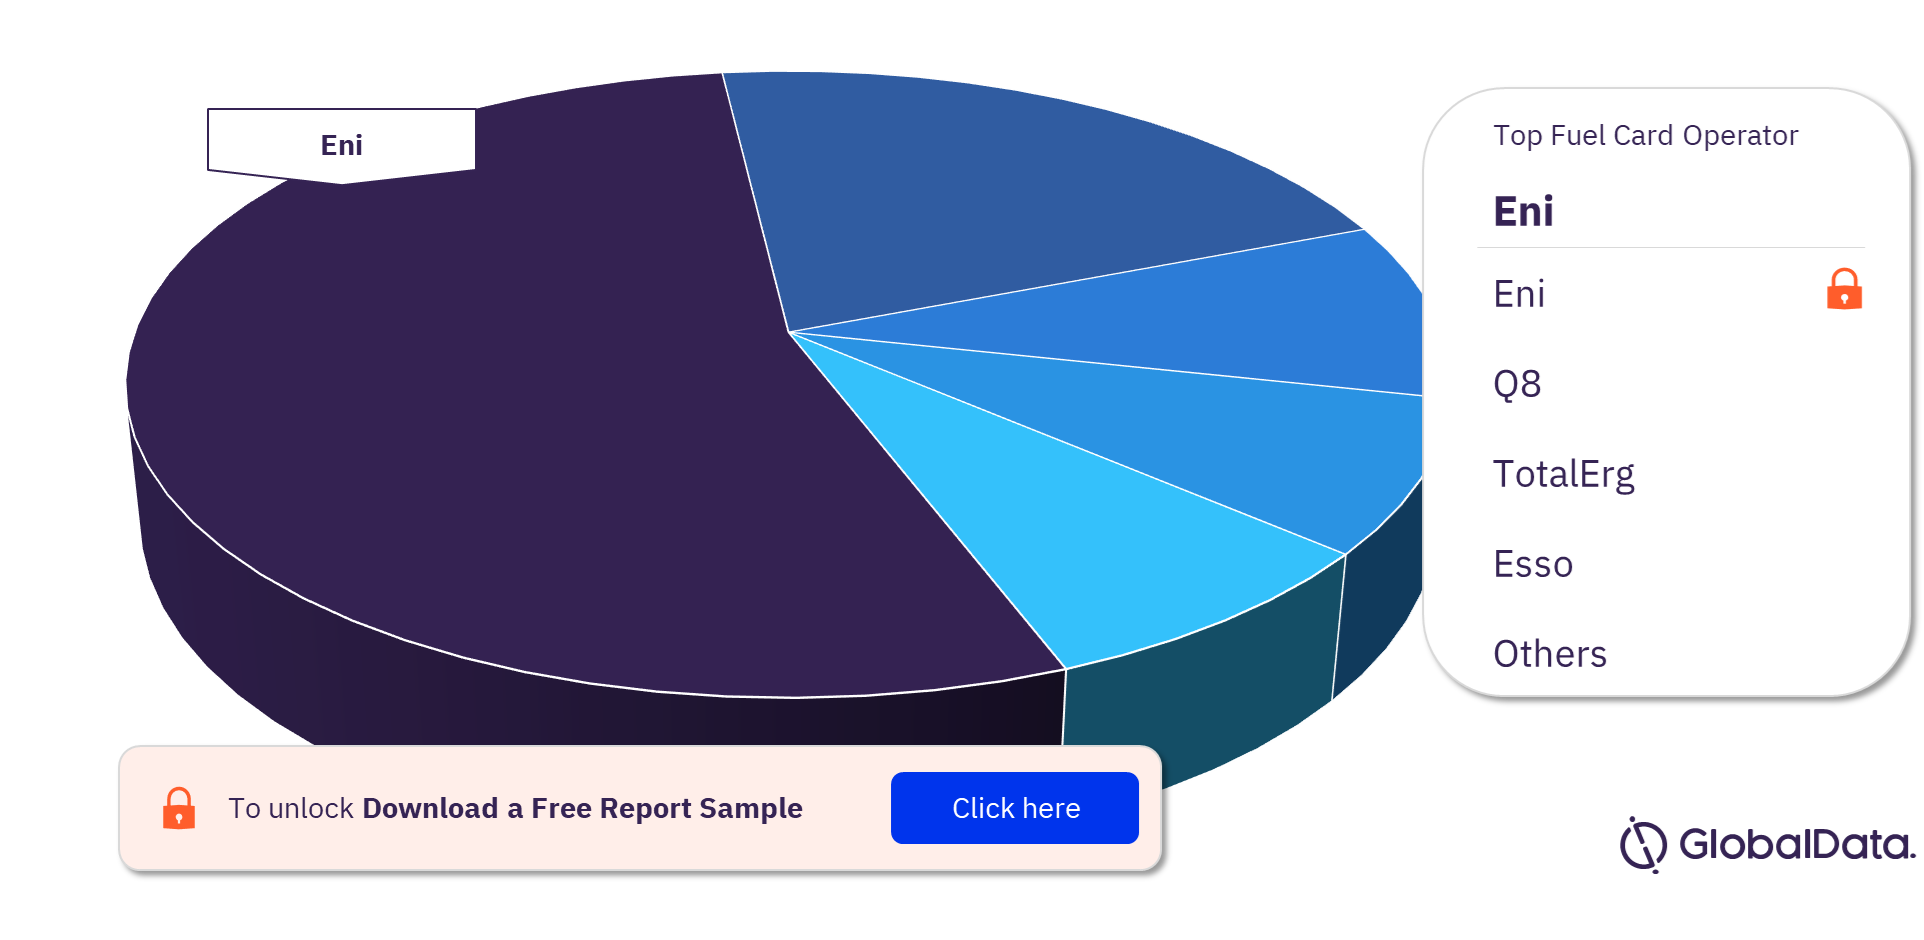 Italy Fuel Cards Market Analysis by Fuel Card Operators, 2022 (%)